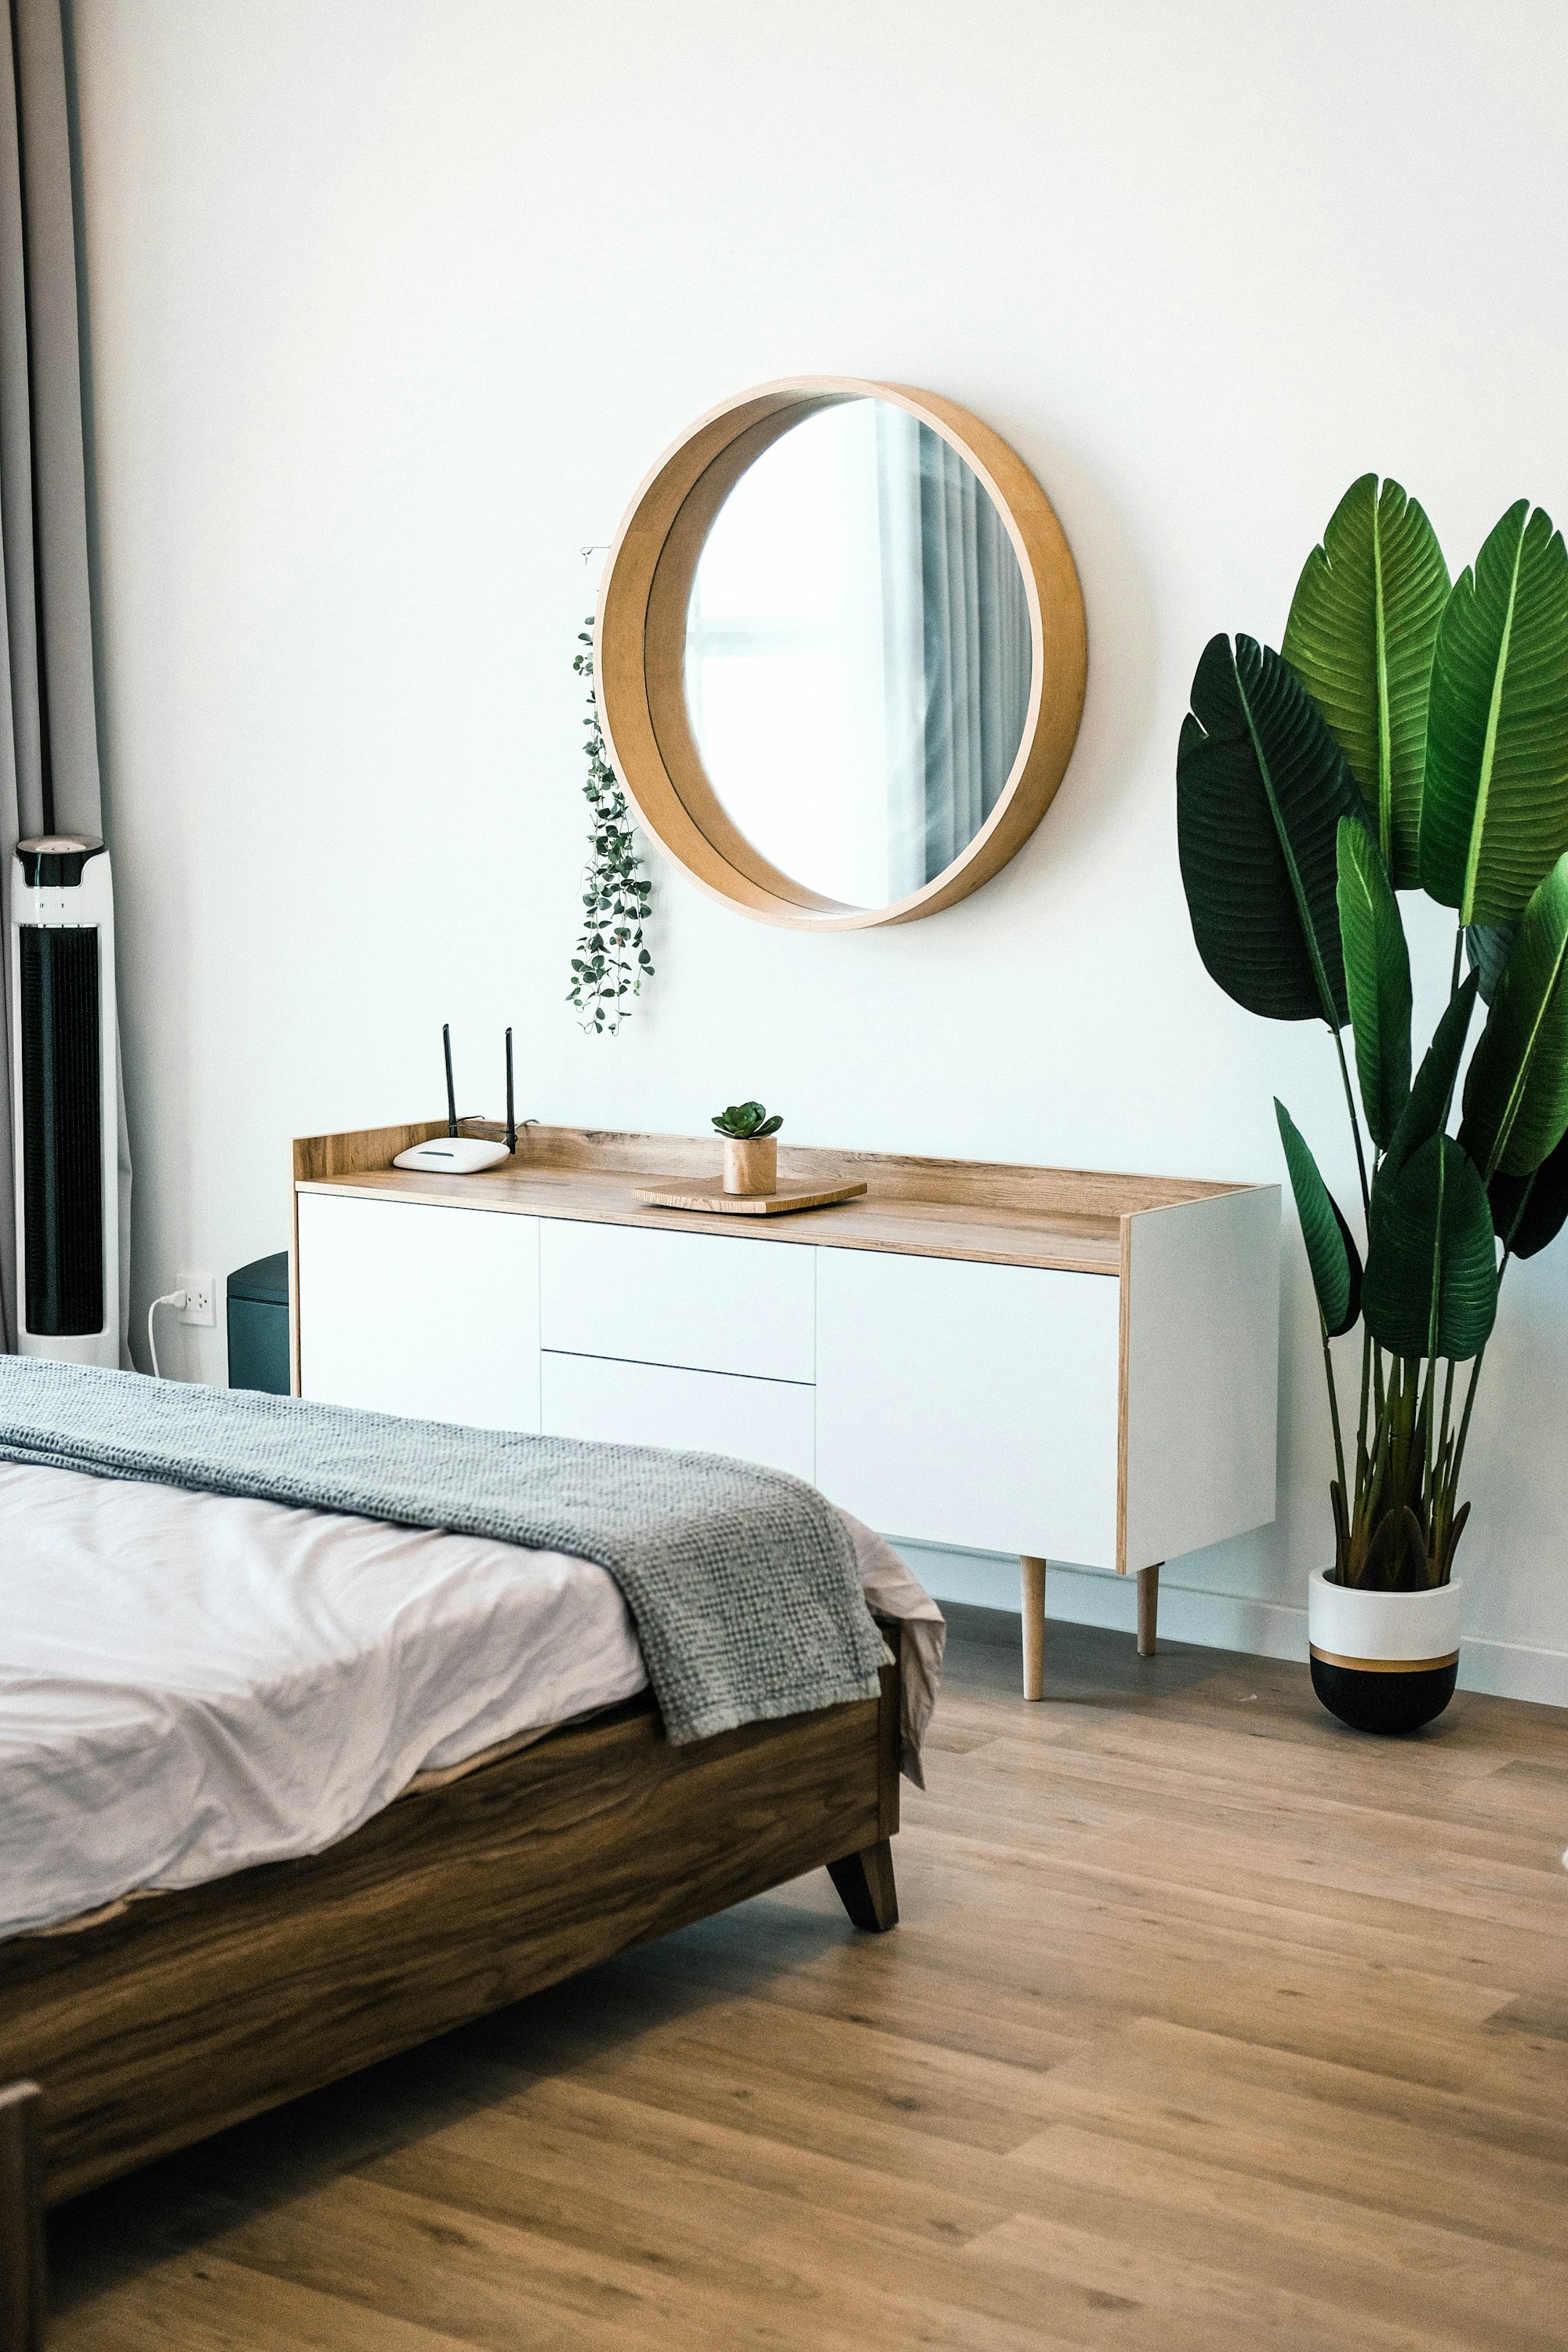 white wooden dresser with mirror, plants and a wooden bedframe